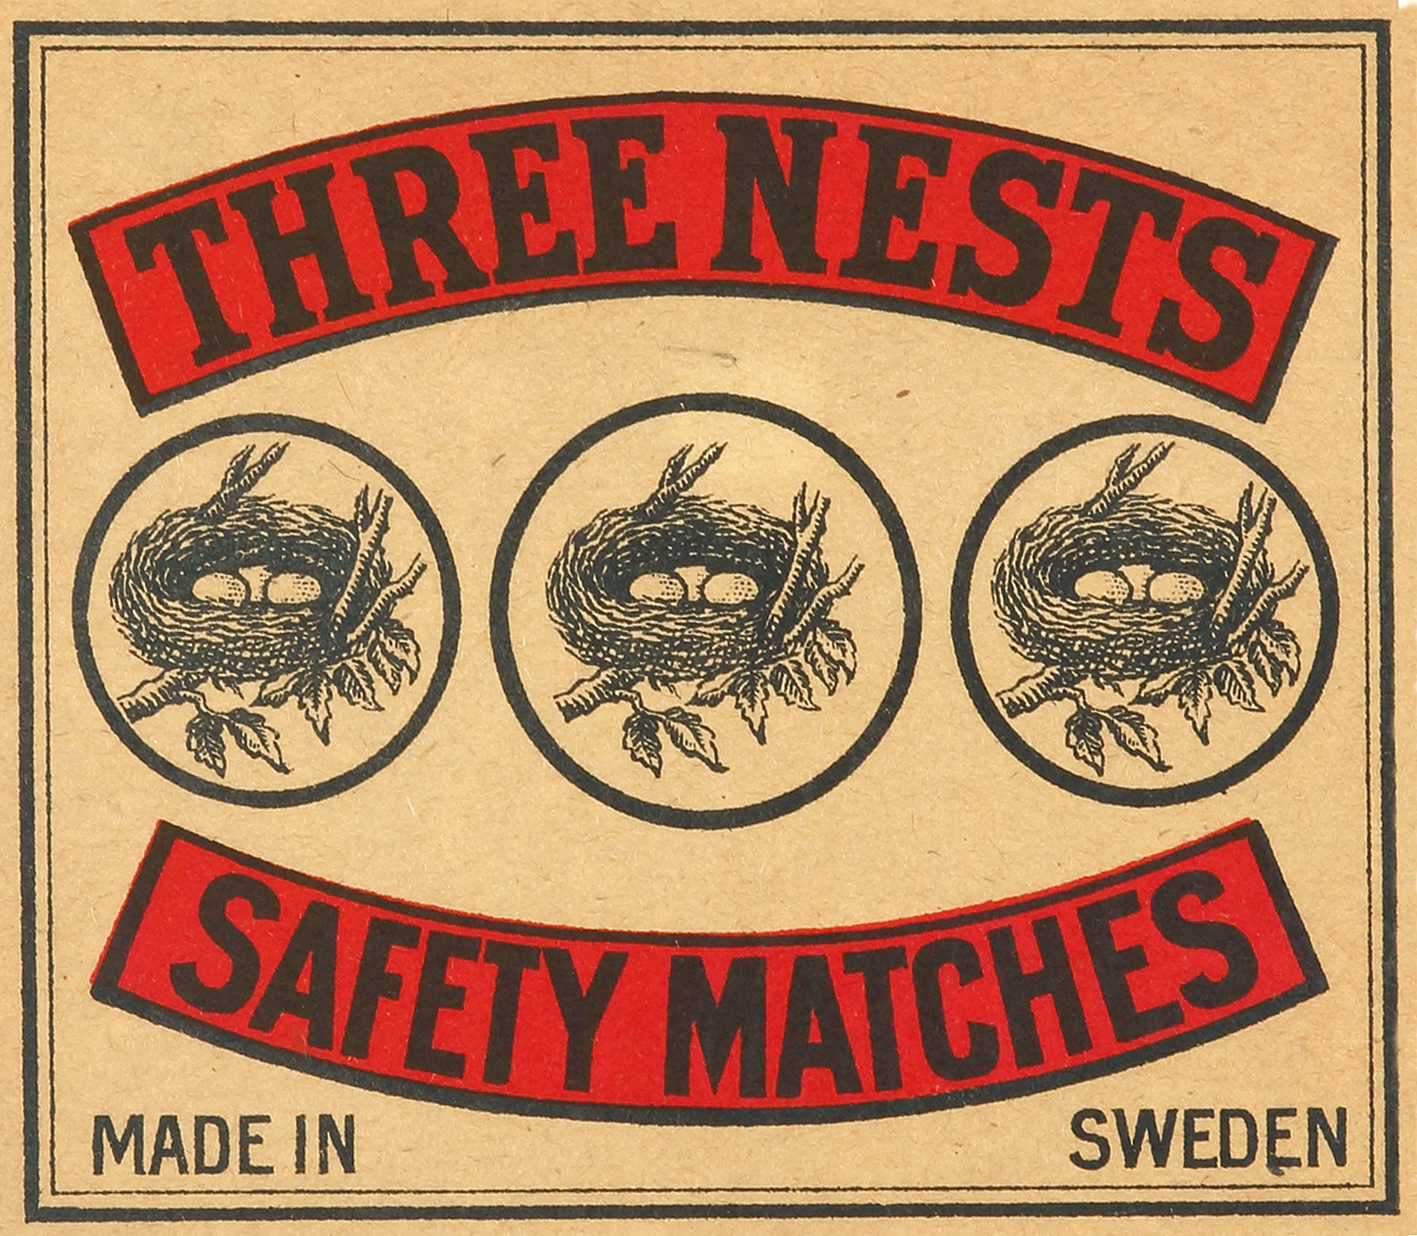 Three Nests - Antique Print from 1900